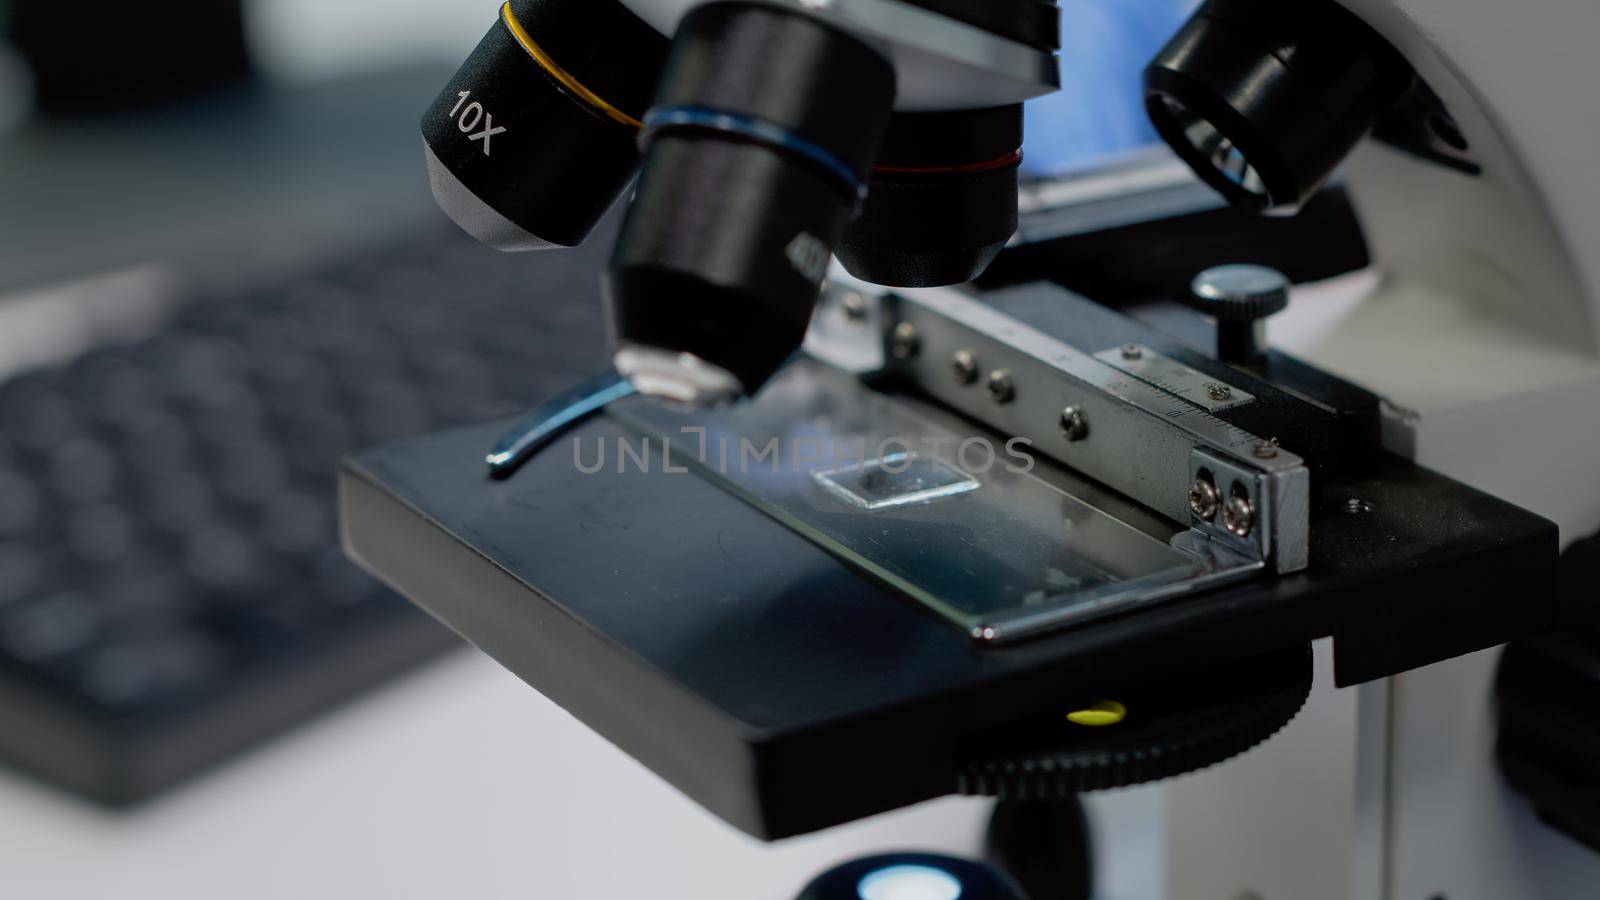 Close up of microscopic sample tray for optical analysis in laboratory. Microscope with magnifying lens used for dna and bacteria investigation in pharmaceutical research industry